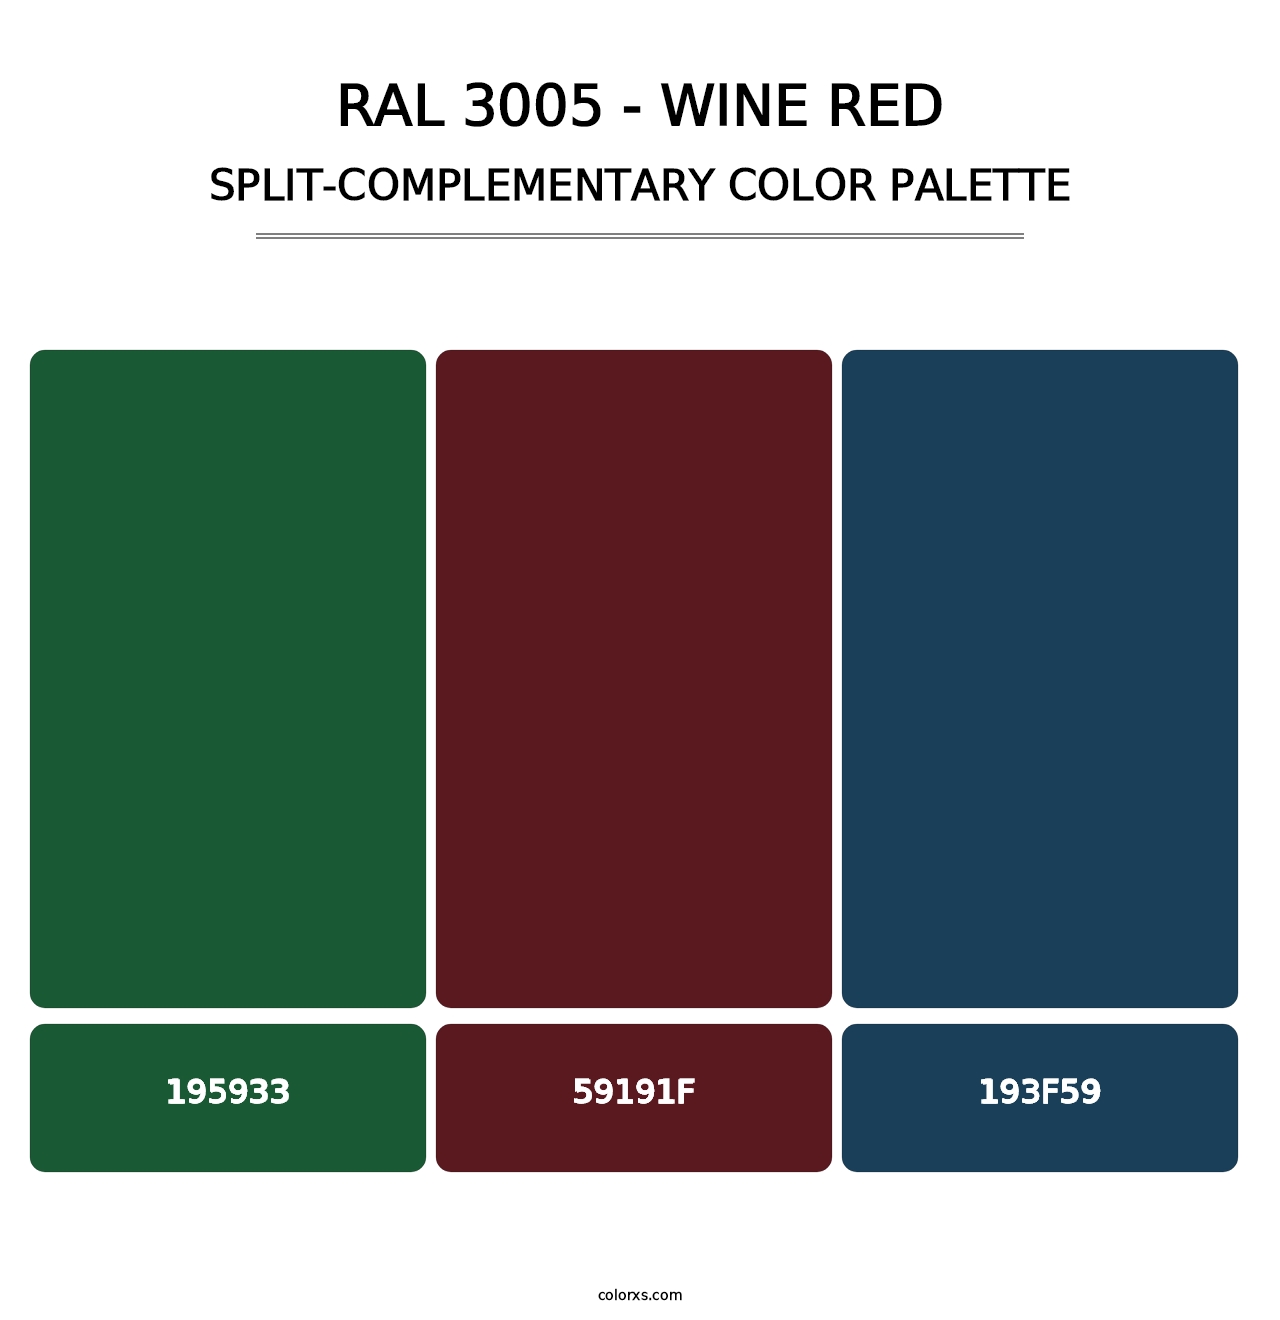 RAL 3005 - Wine Red - Split-Complementary Color Palette